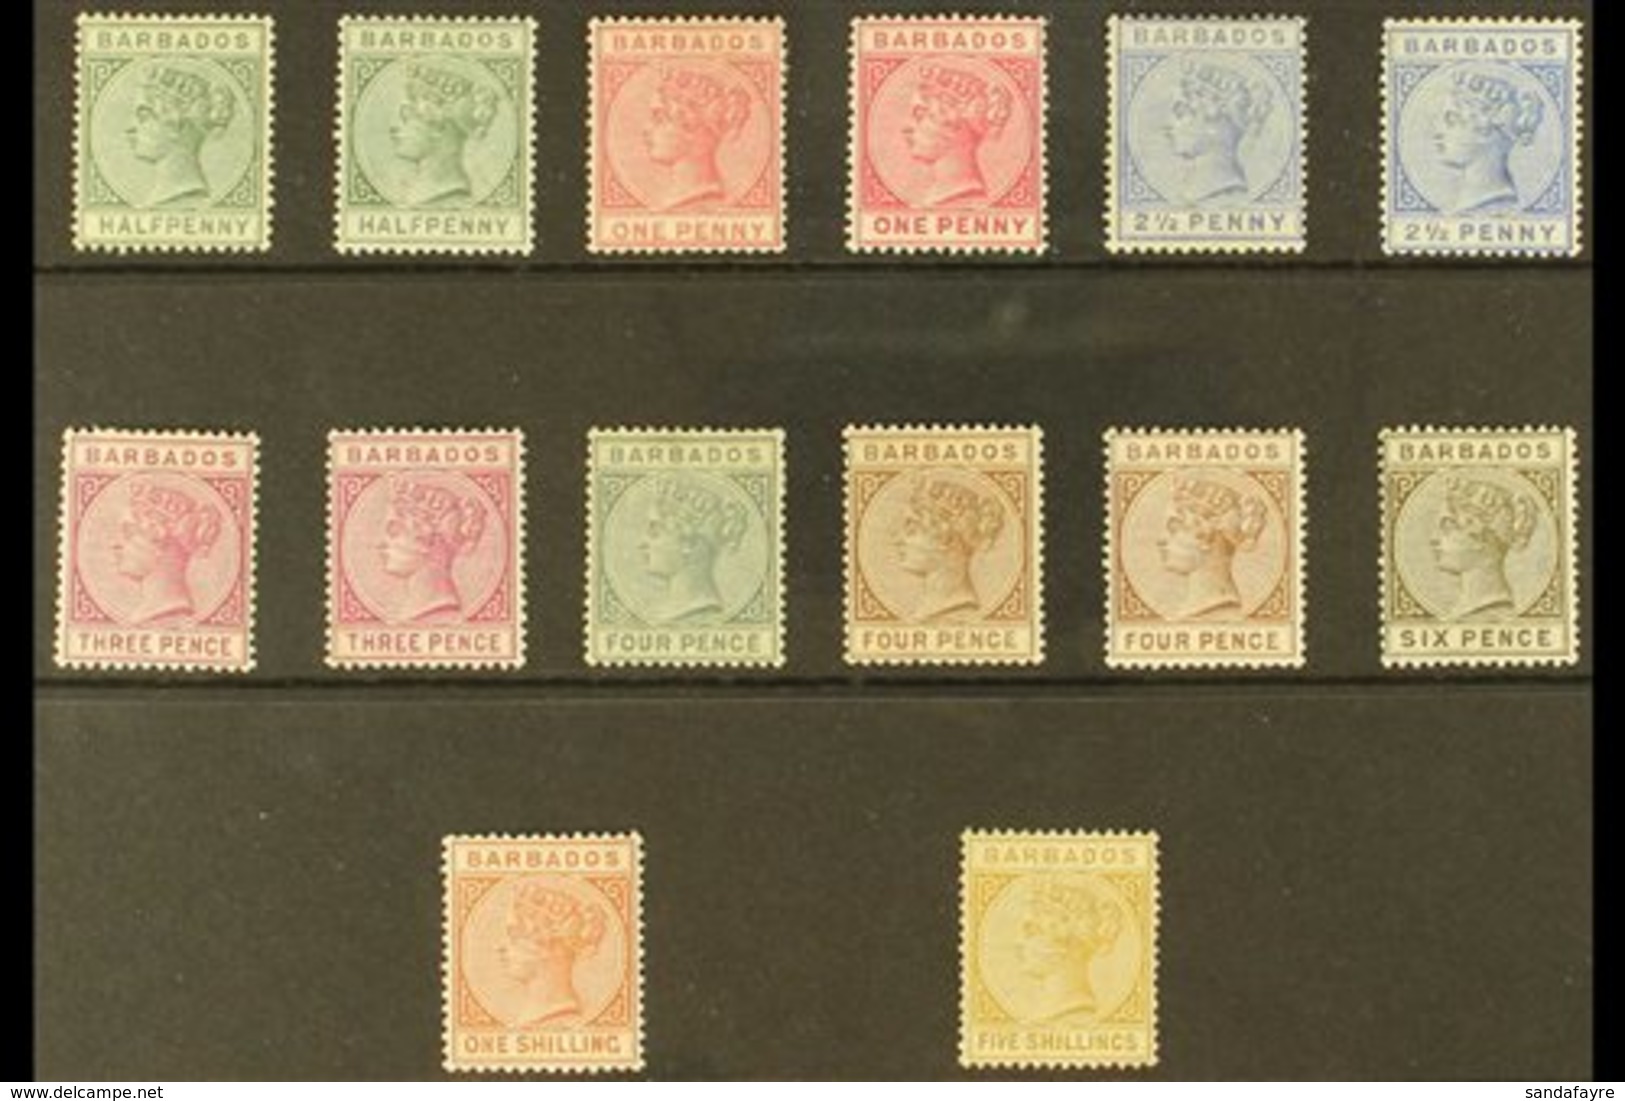 1882-86 QV Definitives Complete Set Including All The SG Listed Shades, SG 89/103, Very Fine Mint. Fresh And Attractive! - Barbados (...-1966)